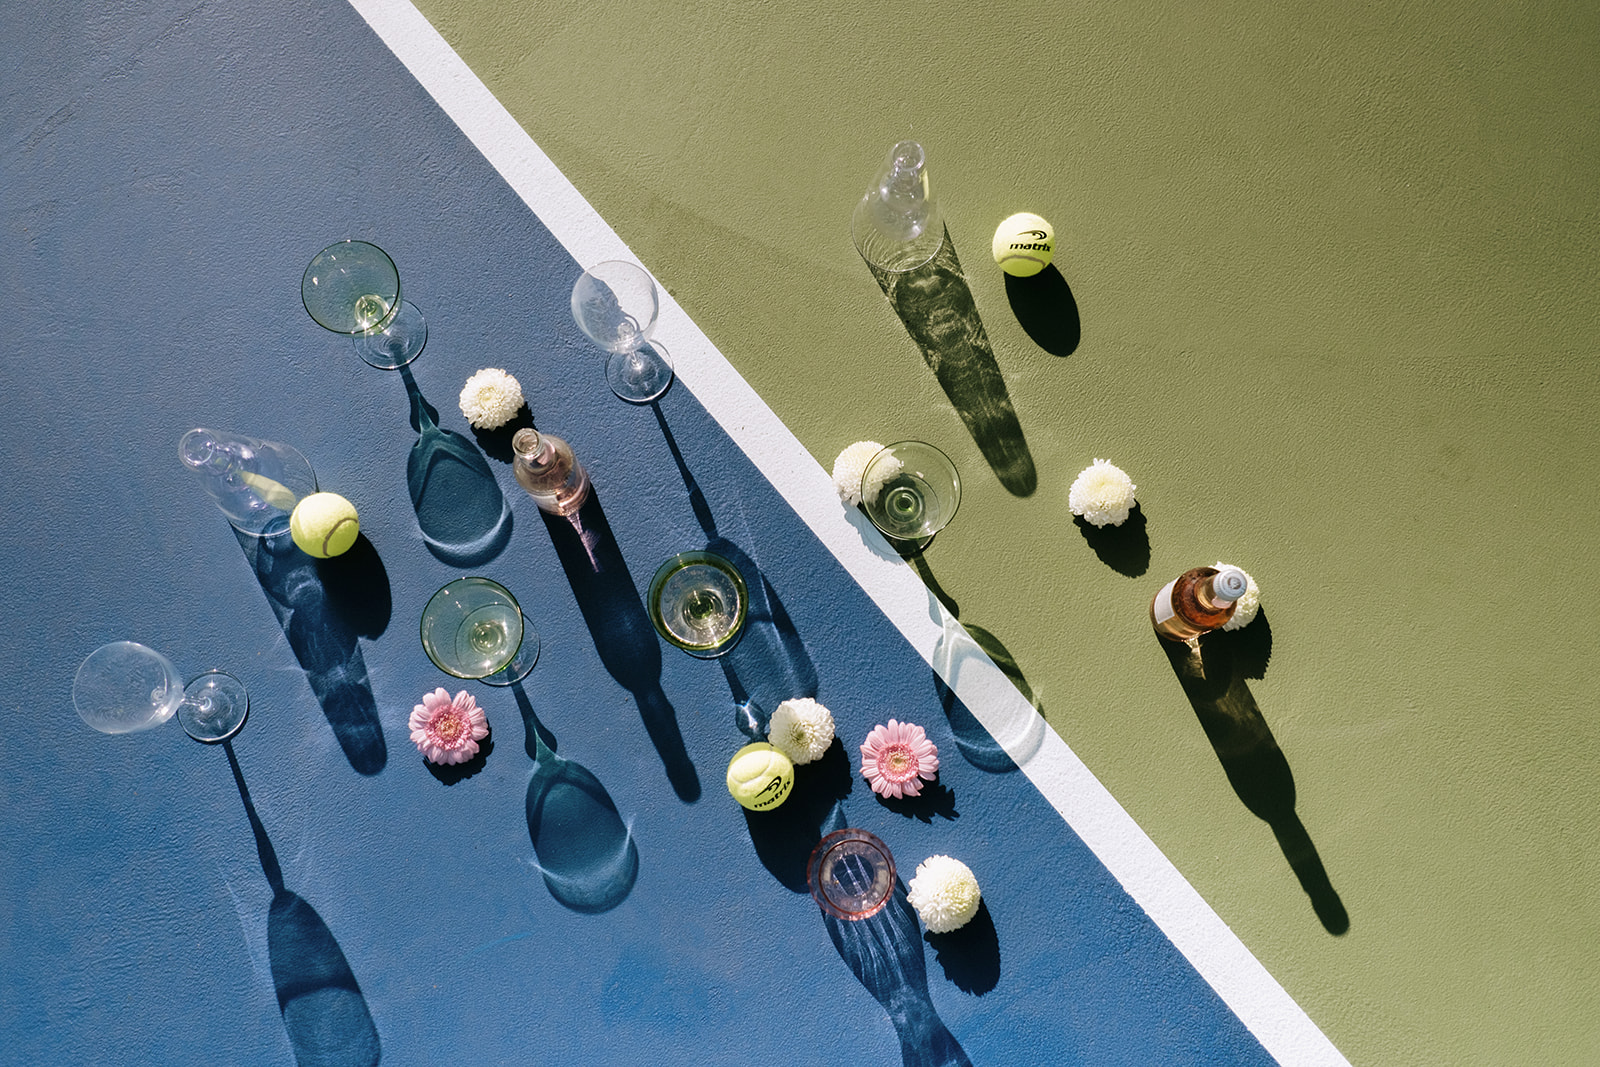 Unique tennis-themed wedding inspiration, chartreuse coup and pastel pink glassware featured in alternative flat lay photo, summery florals in pastel pink and white for wedding details photo, neon and pastel colour palette ideas for summer wedding